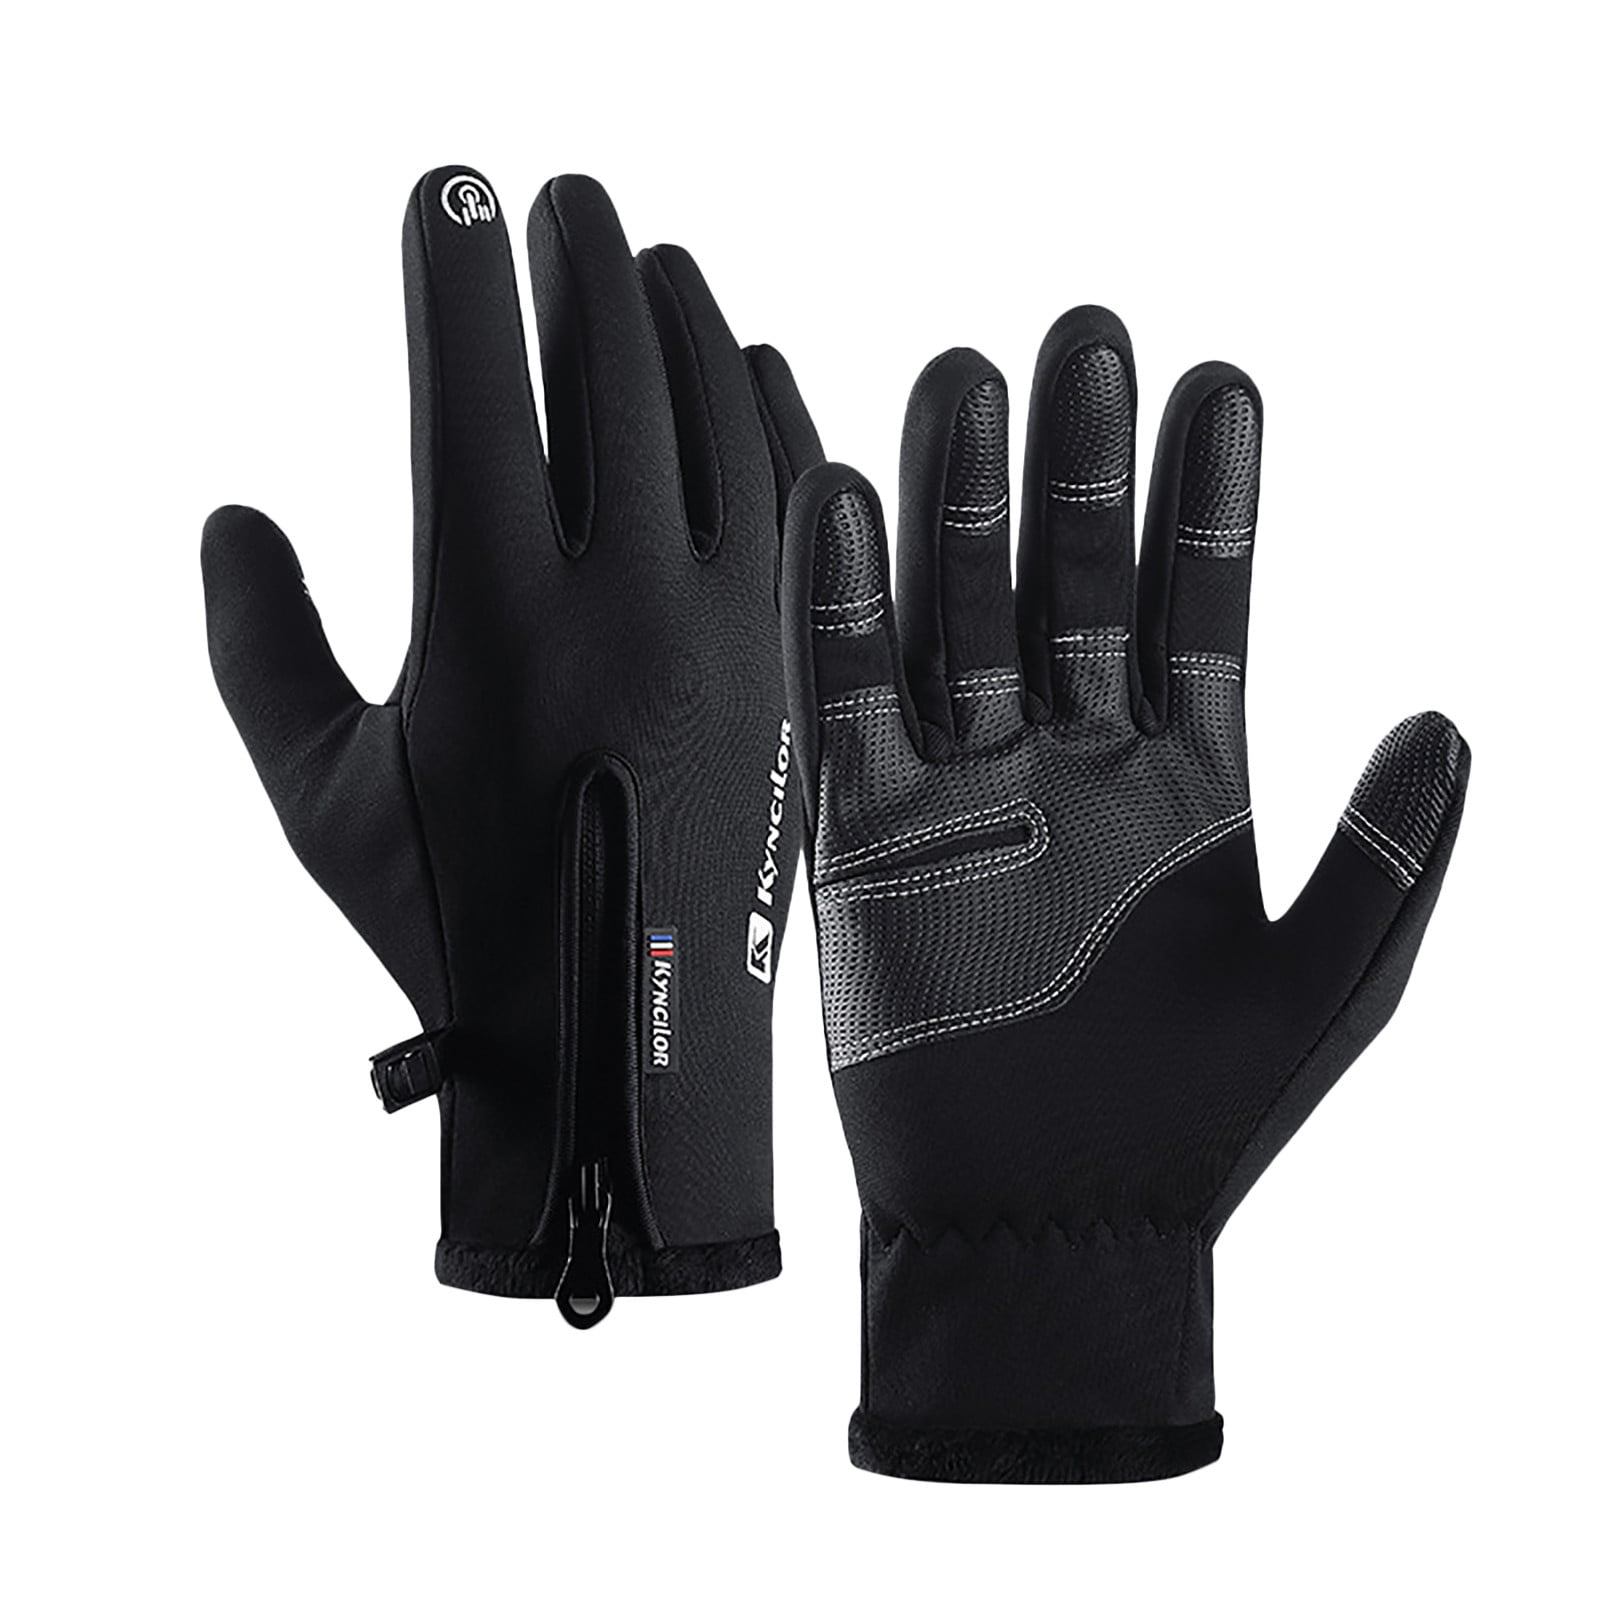 Winter Gloves Unisex Windstopers Warmer Touchscreen Glove Thermal Hand Cover Kit 